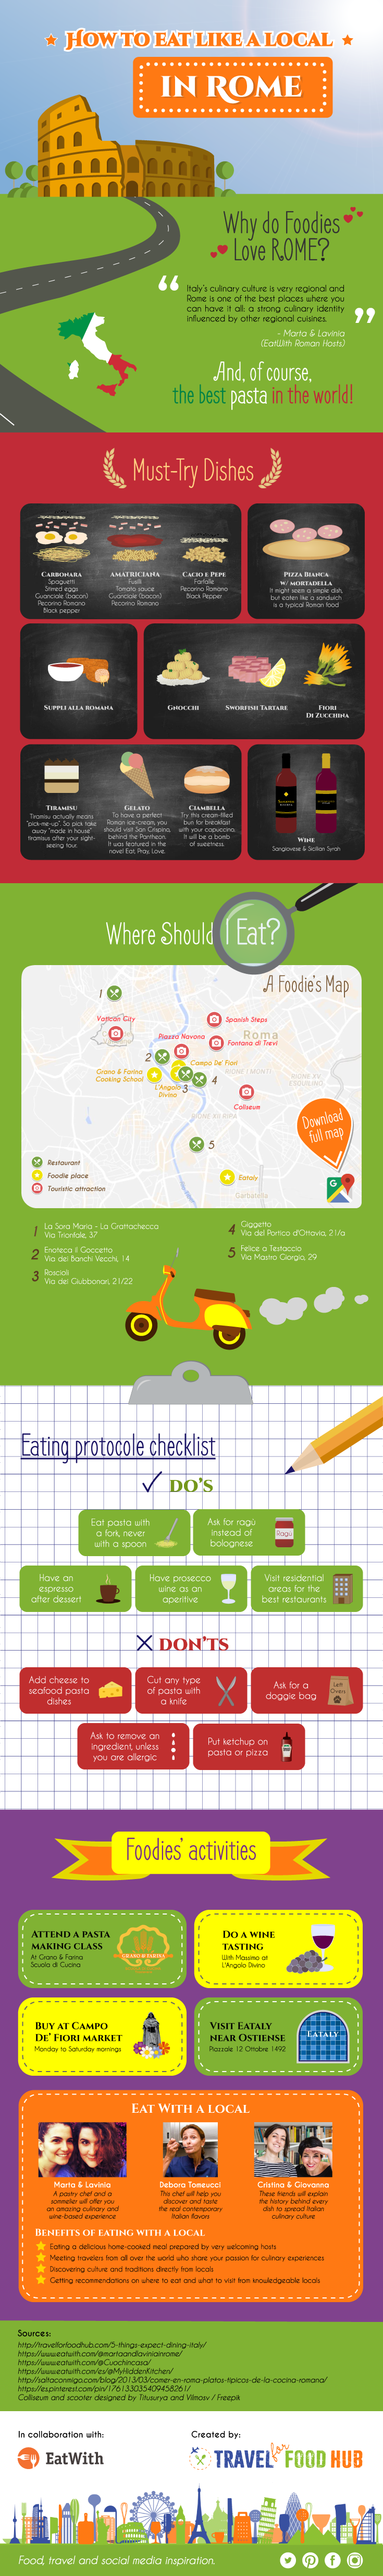 When in Rome, Eat Like the Romans Do! - Infographic